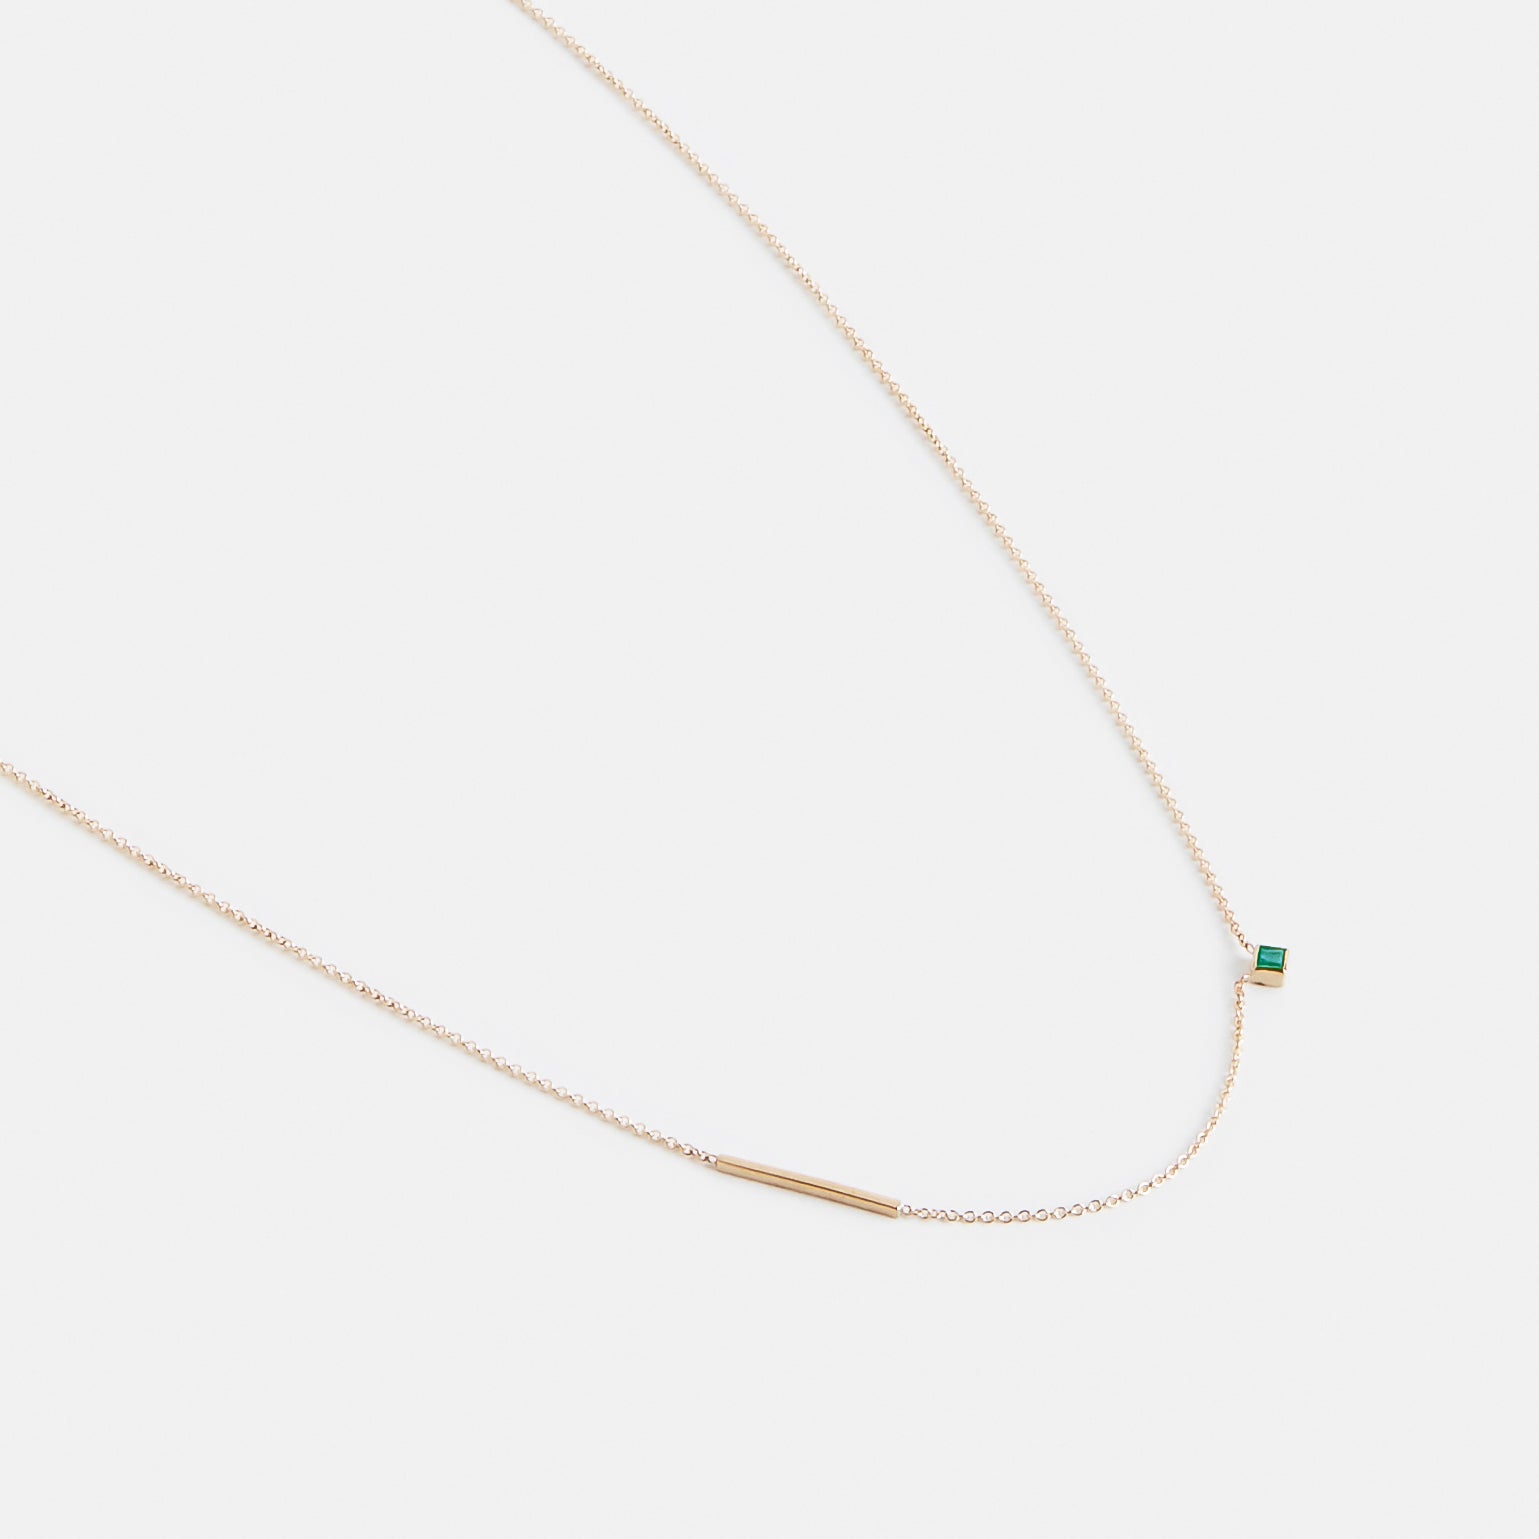 Inu Delicate Necklace in 14k Gold Set with Emerald By SHW Fine Jewelry New York City